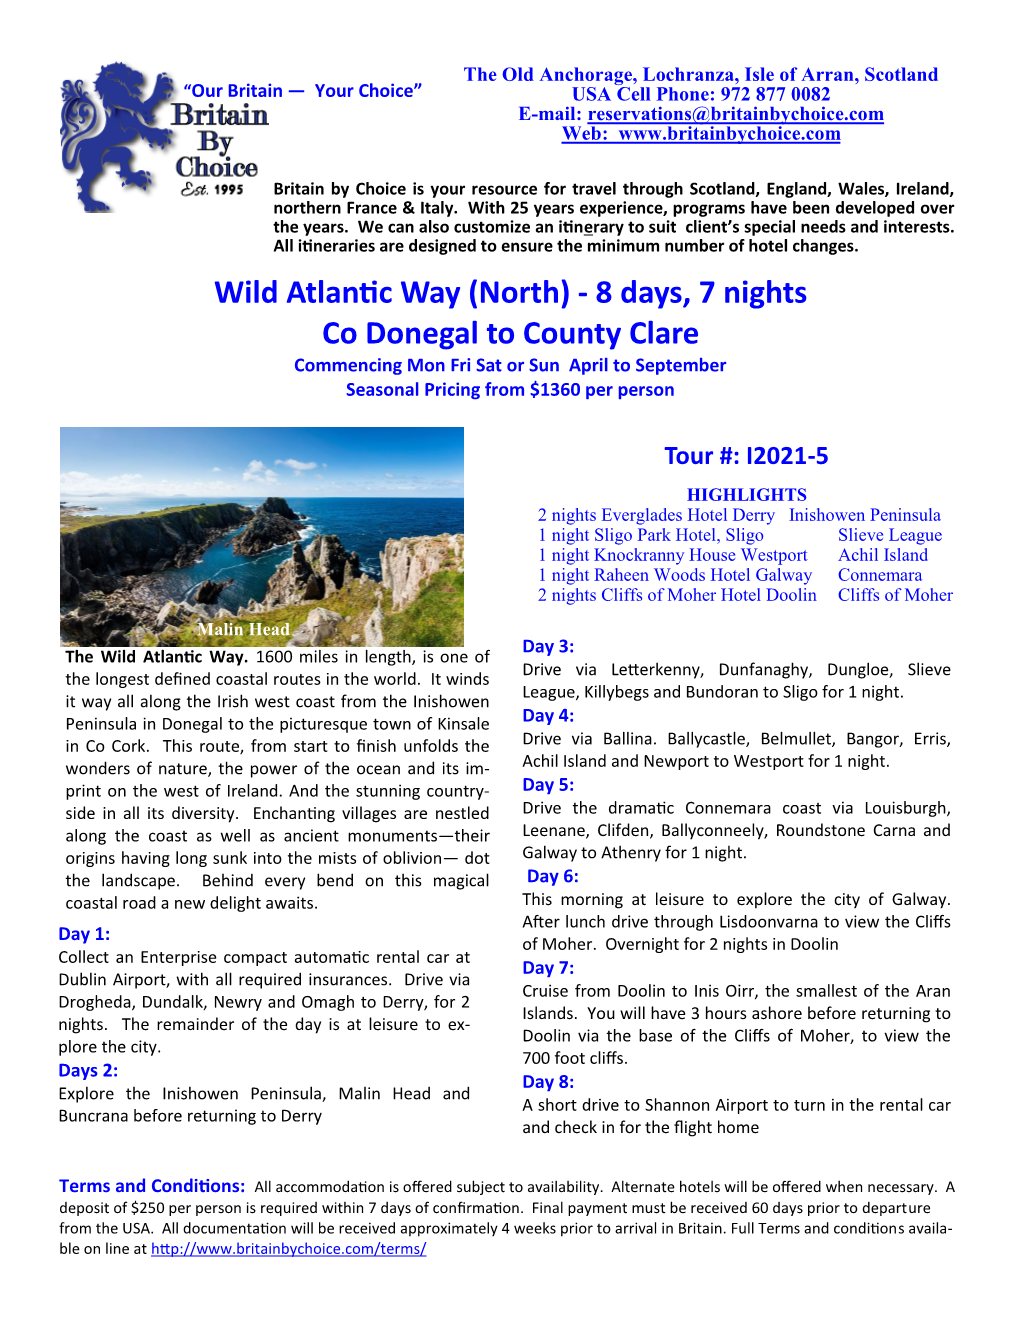 Wild Atlantic Way (North)- 8 Days, 7 Nights Co Donegal to County Clare Commencing Mon Fri Sat Or Sun April to September Seasonal Pricing from $1360 Per Person